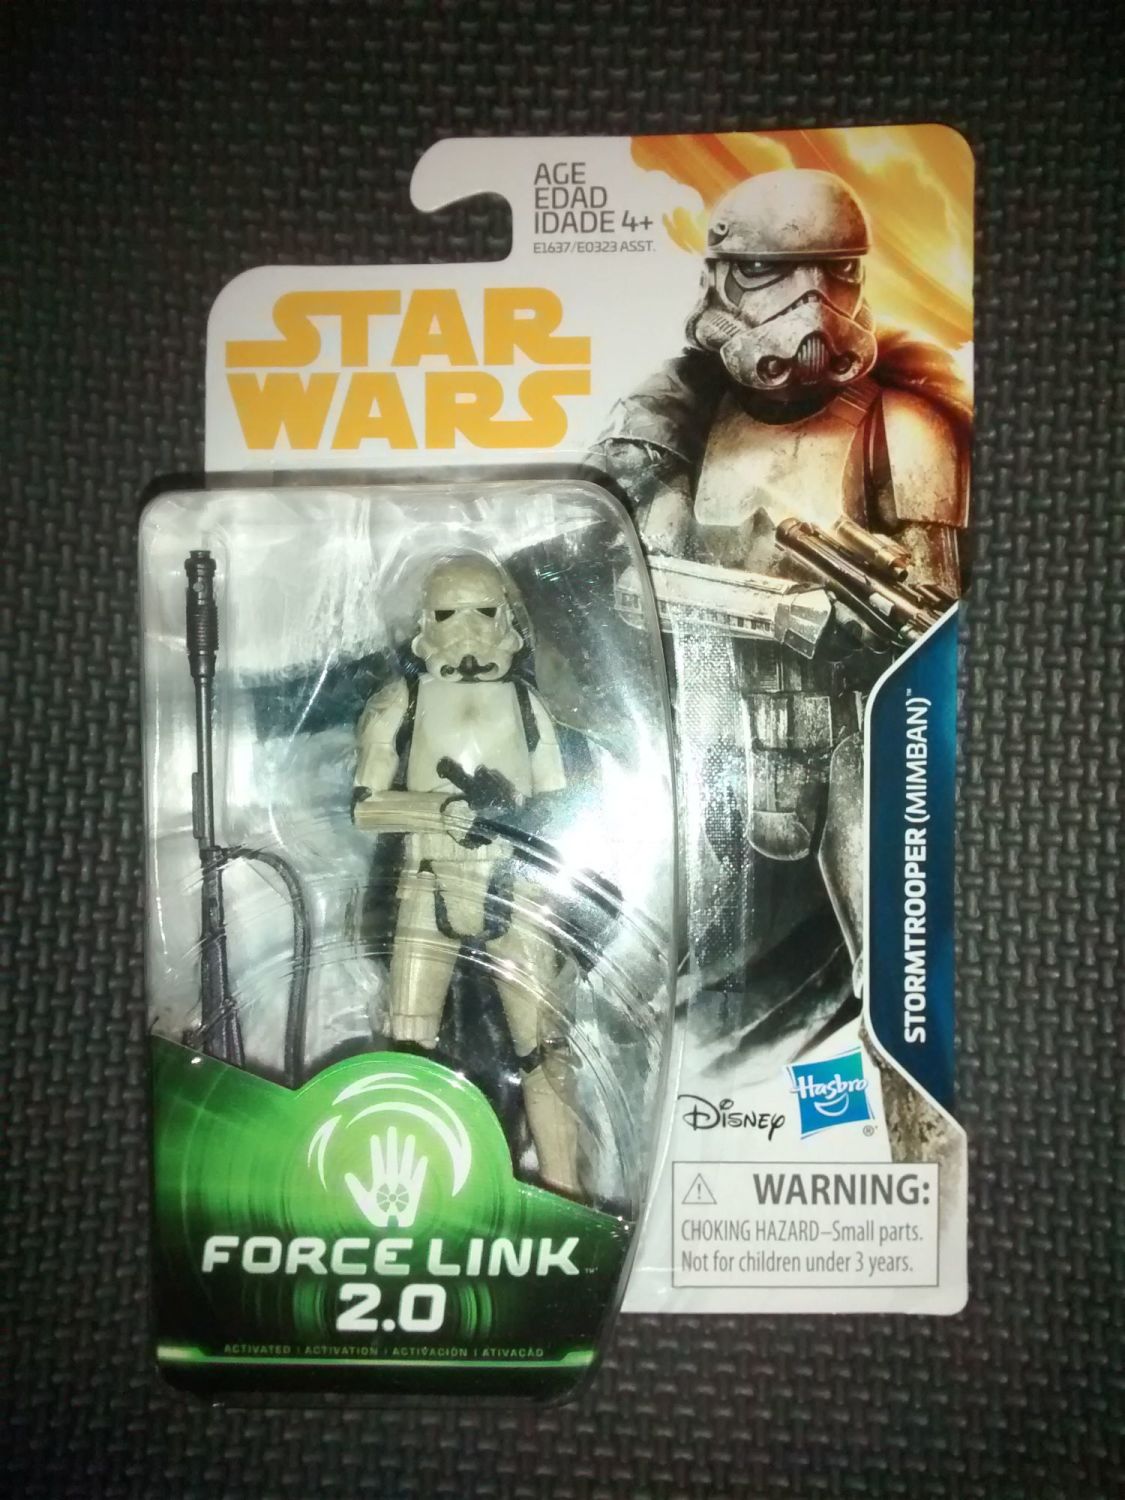 Star Wars Stormtrooper (Mimban) Collectable Figure E1637/E0323 Force Link -  2.0 Compatible 3.75